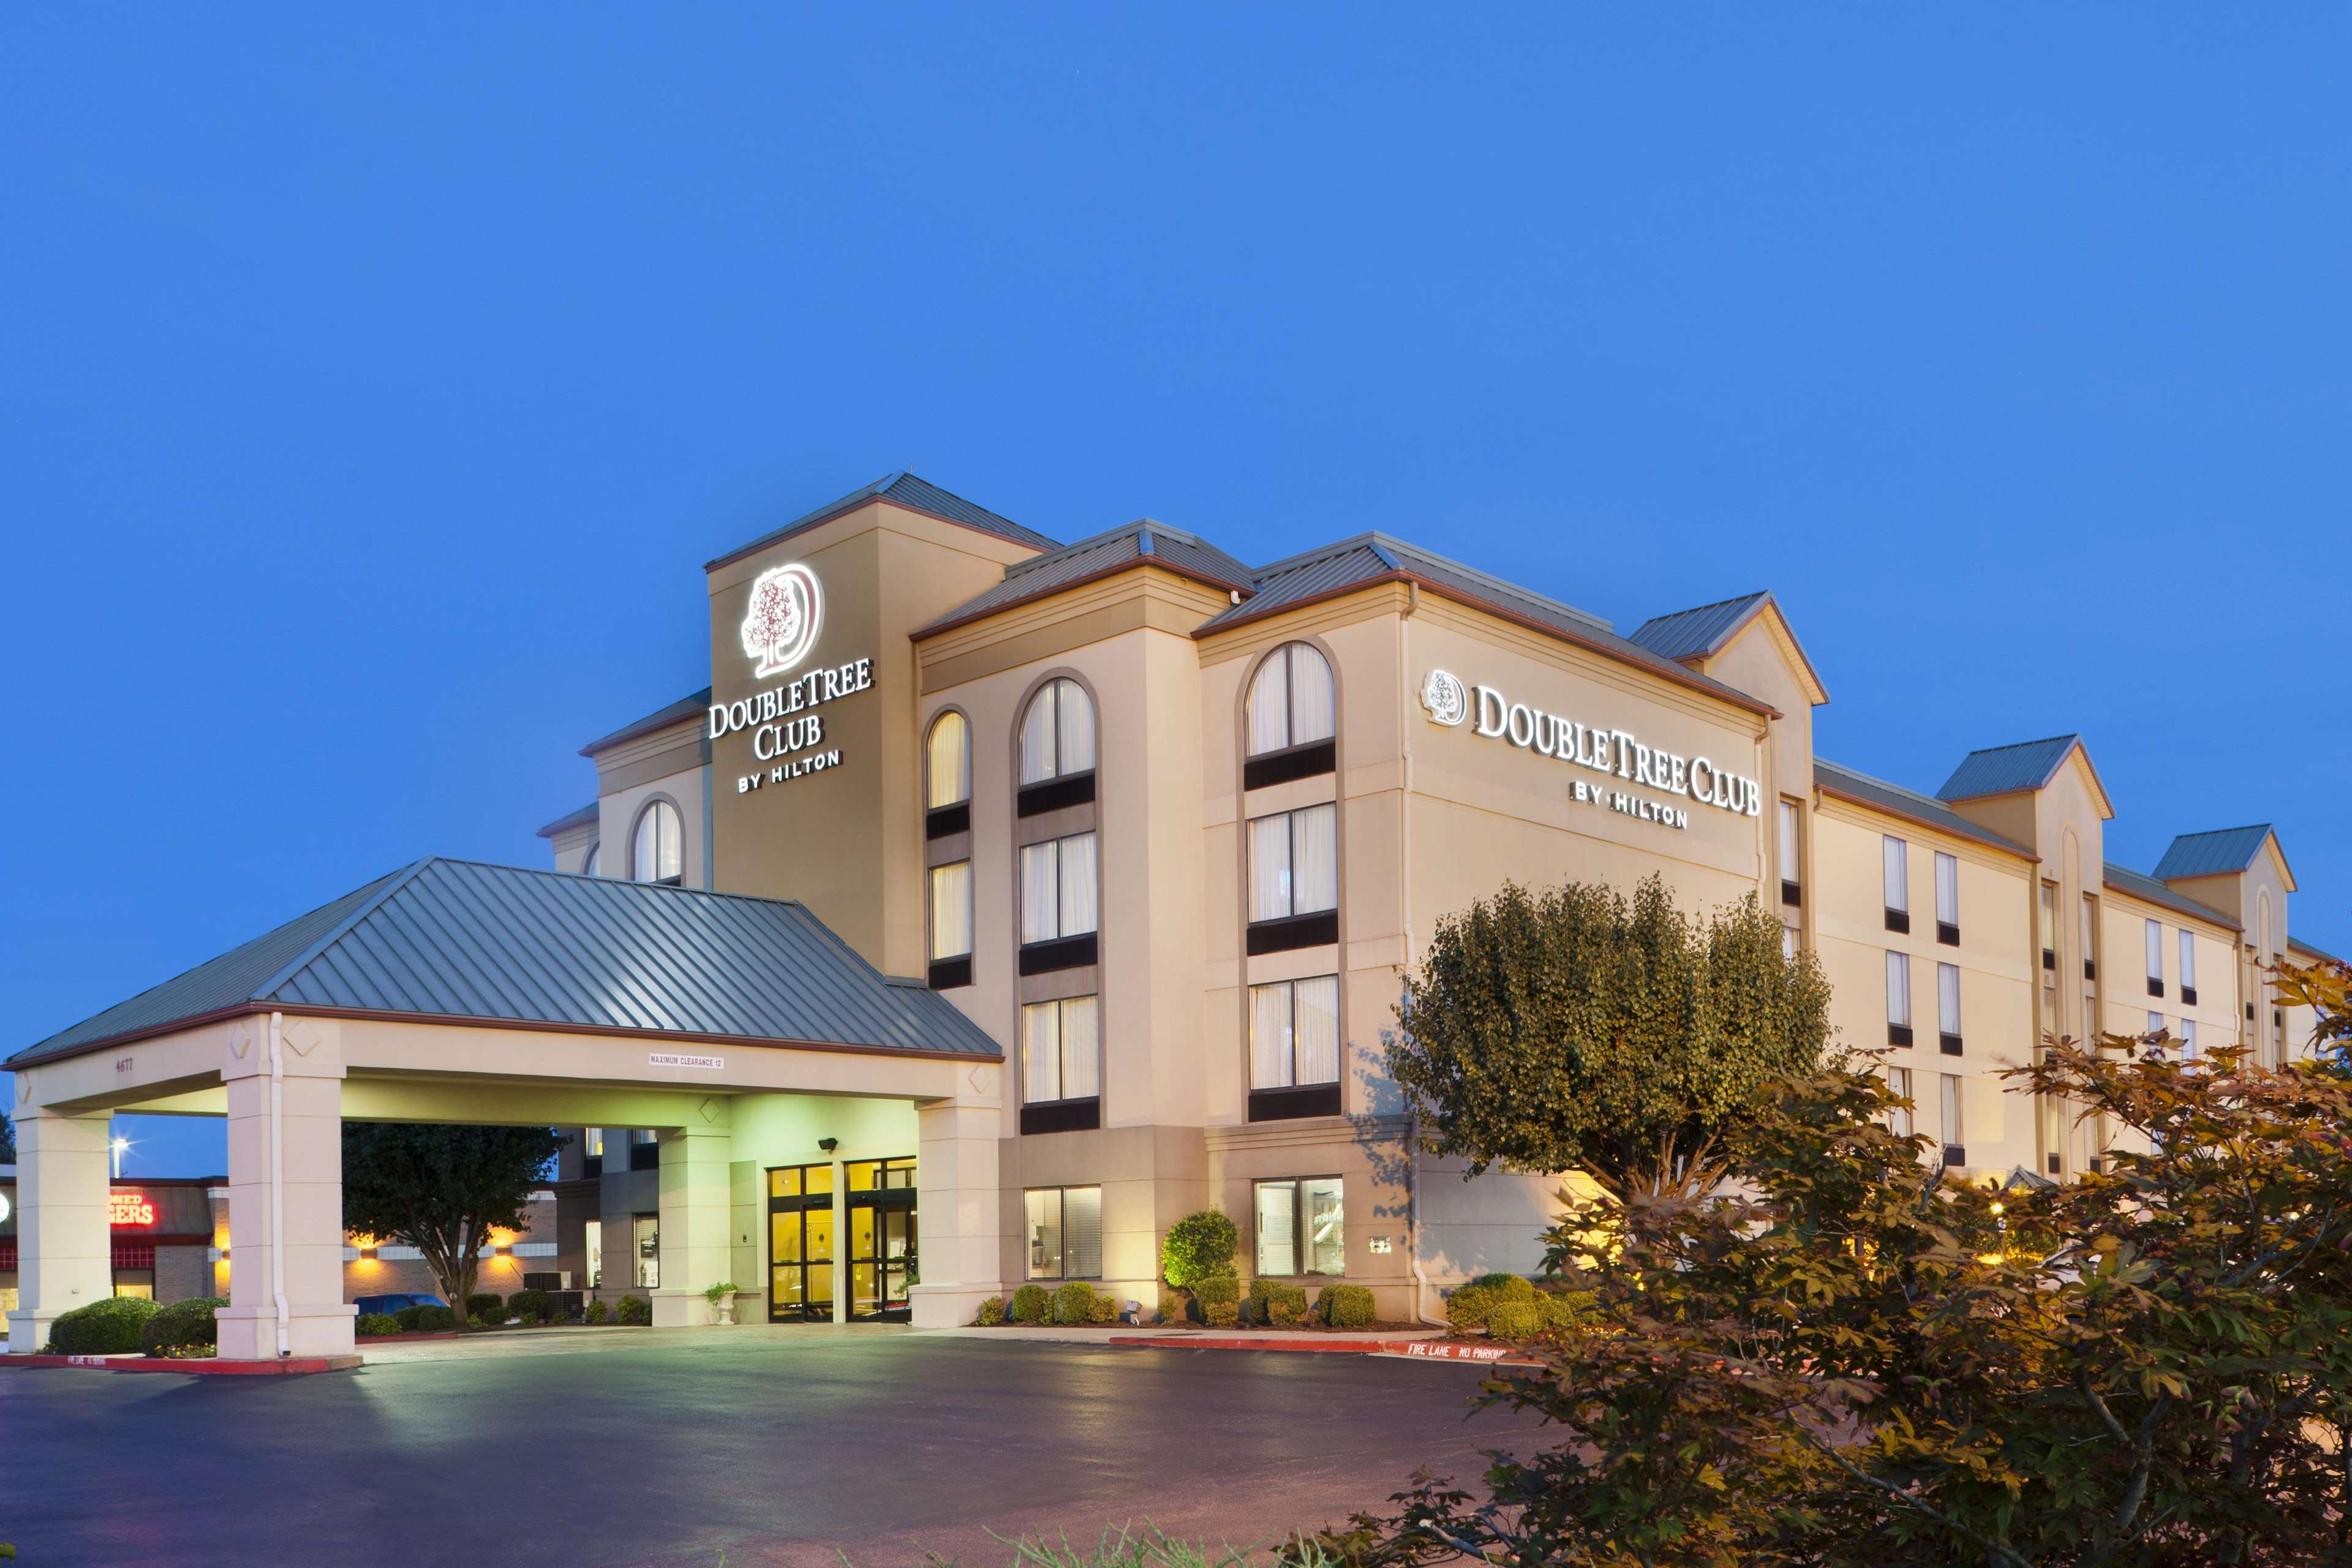 DoubleTree Club by Hilton Hotel Springdale Coupons near me ...